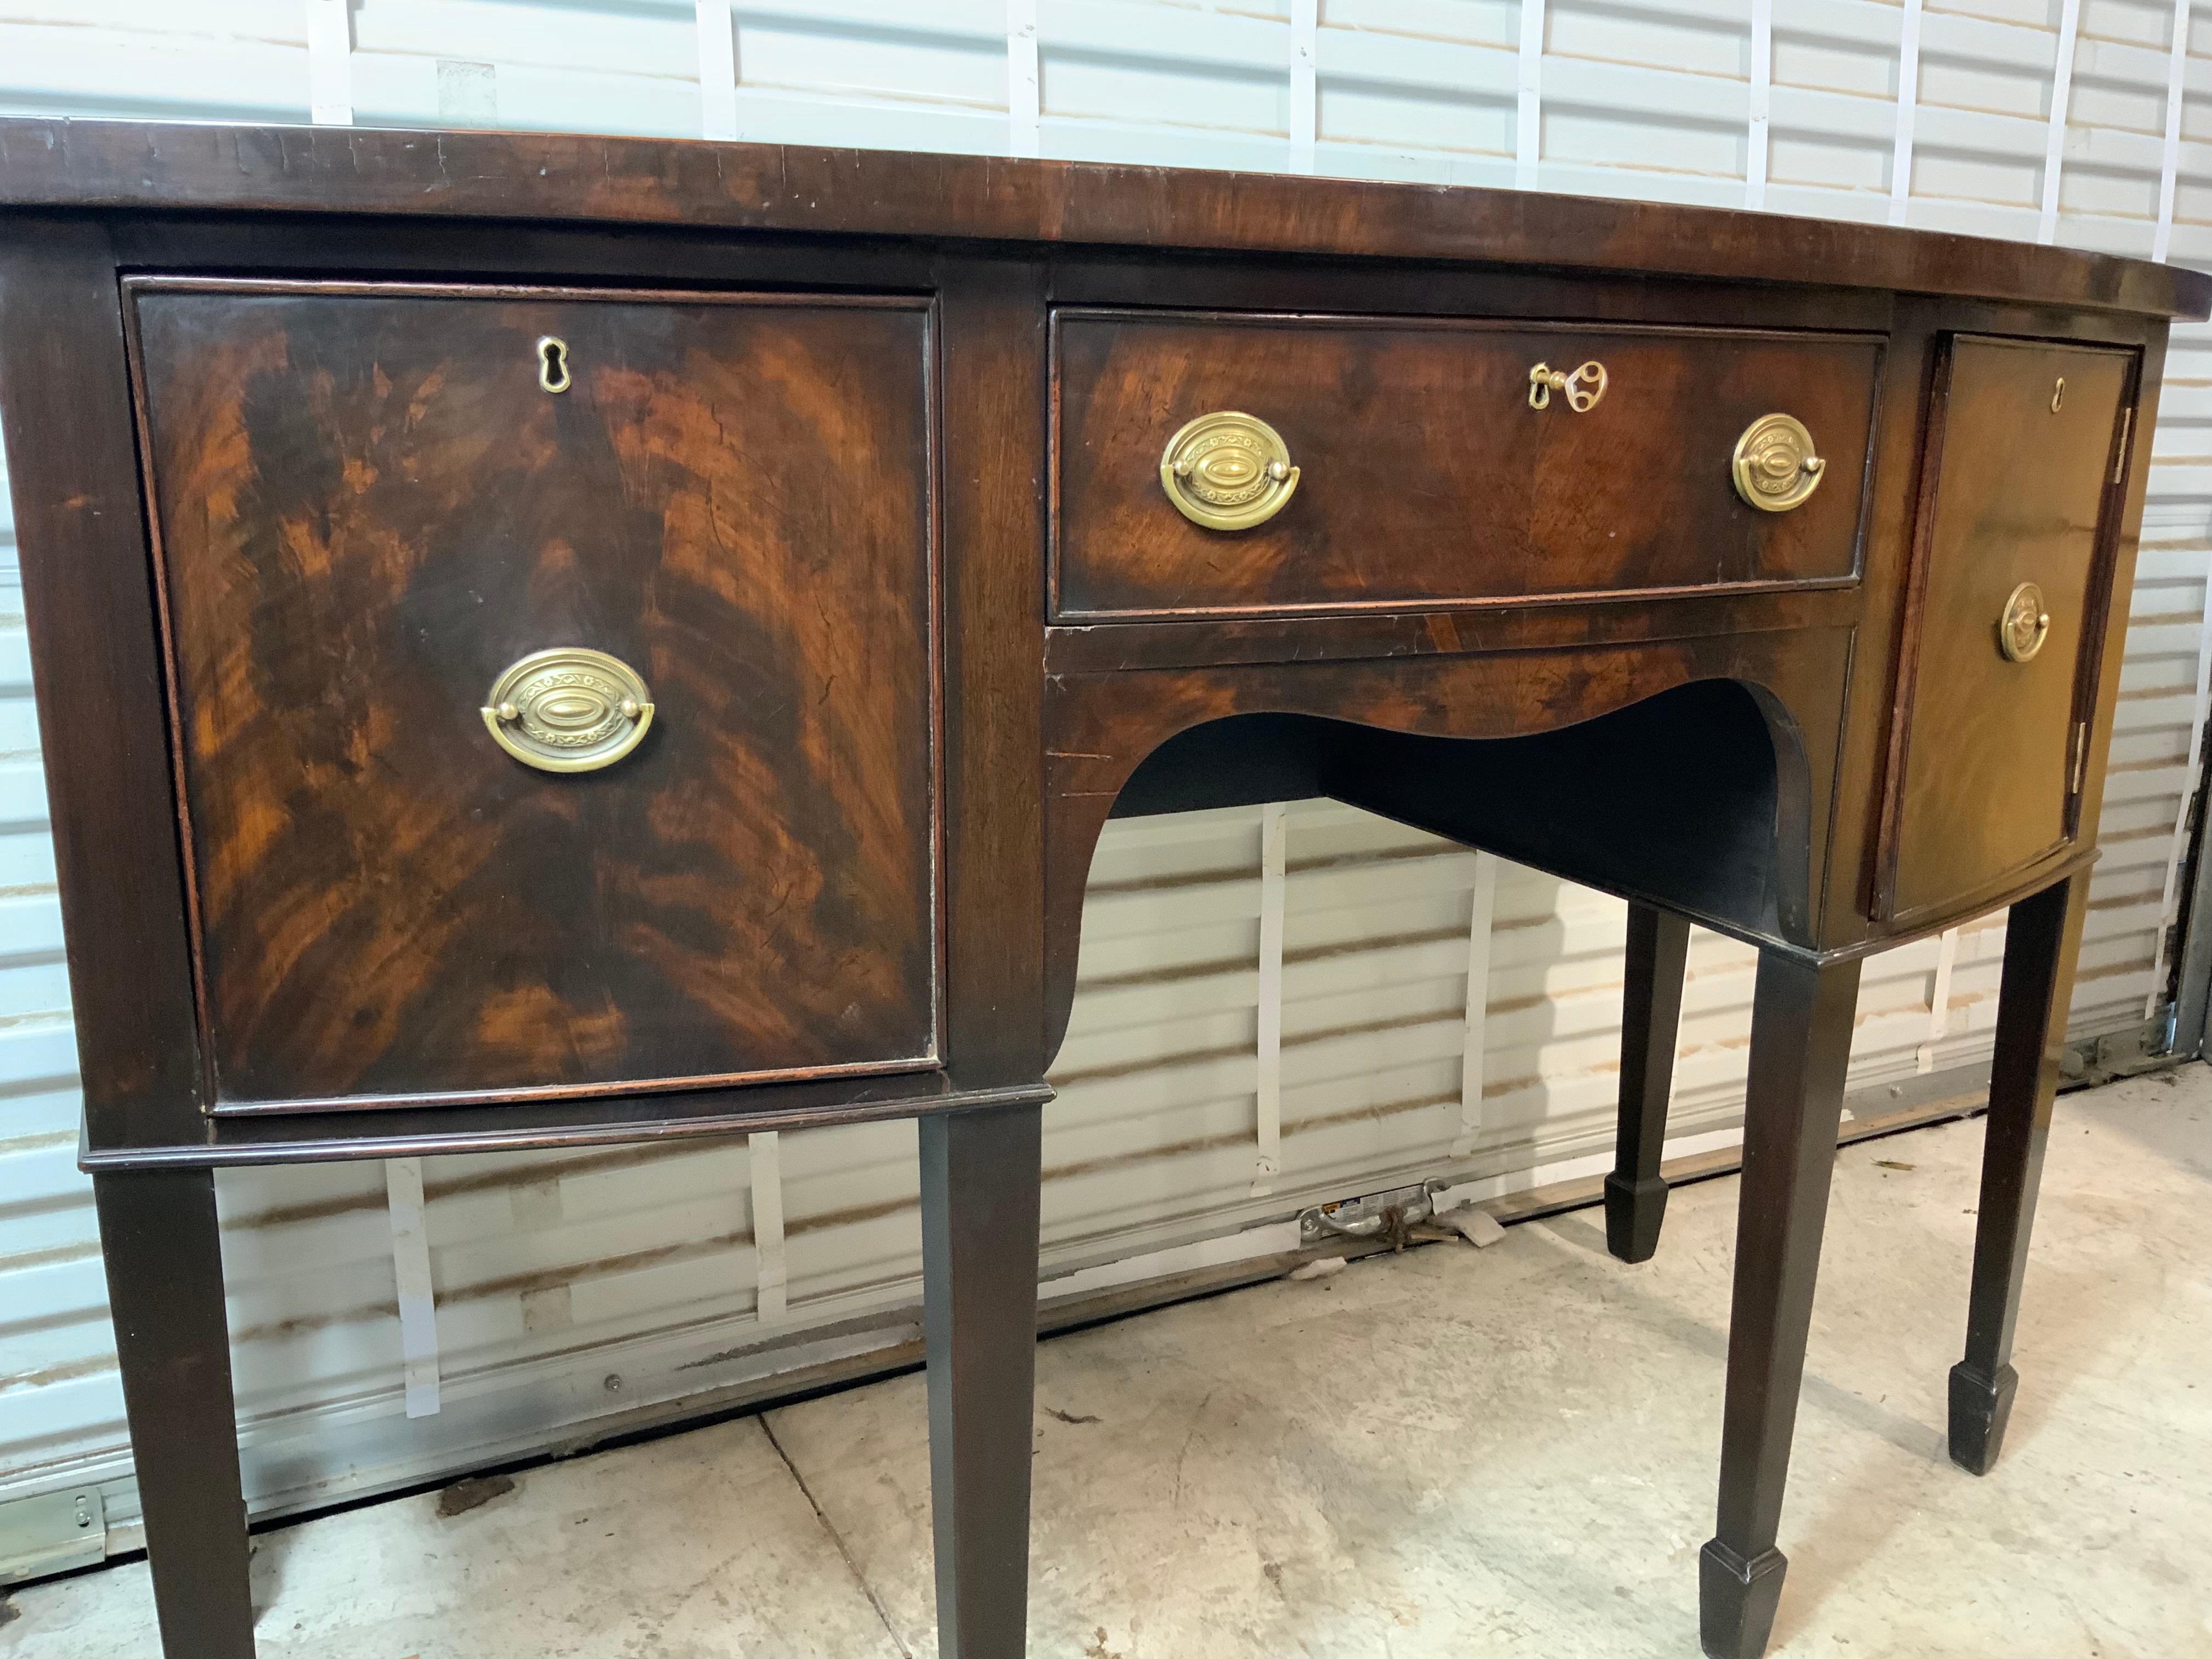 A very nice Georgian Mahogany sideboard early 1900’s on spade feet with two drawers and a door with deep storage compartments.  Old original surface has been lightly cleaned and wax polished and has a great color and patina.  All locks are working